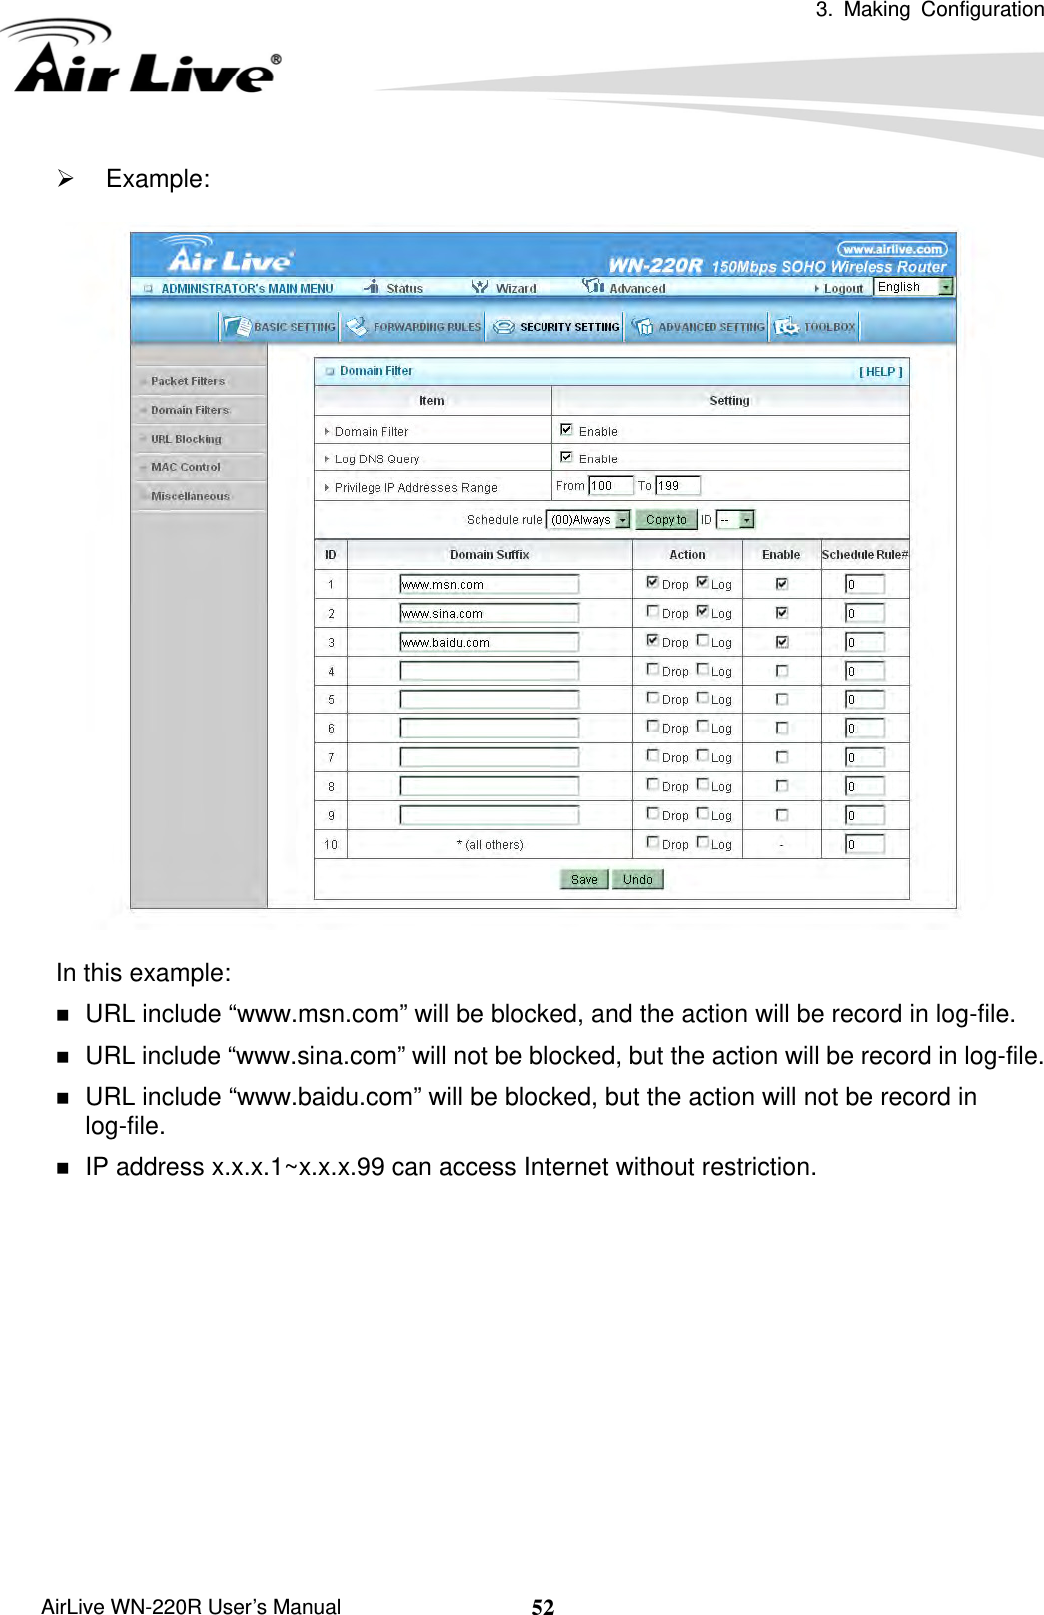  3. Making Configuration       AirLive WN-220R User’s Manual  52¾ Example:  In this example:  URL include “www.msn.com” will be blocked, and the action will be record in log-file.  URL include “www.sina.com” will not be blocked, but the action will be record in log-file.  URL include “www.baidu.com” will be blocked, but the action will not be record in log-file.  IP address x.x.x.1~x.x.x.99 can access Internet without restriction.            